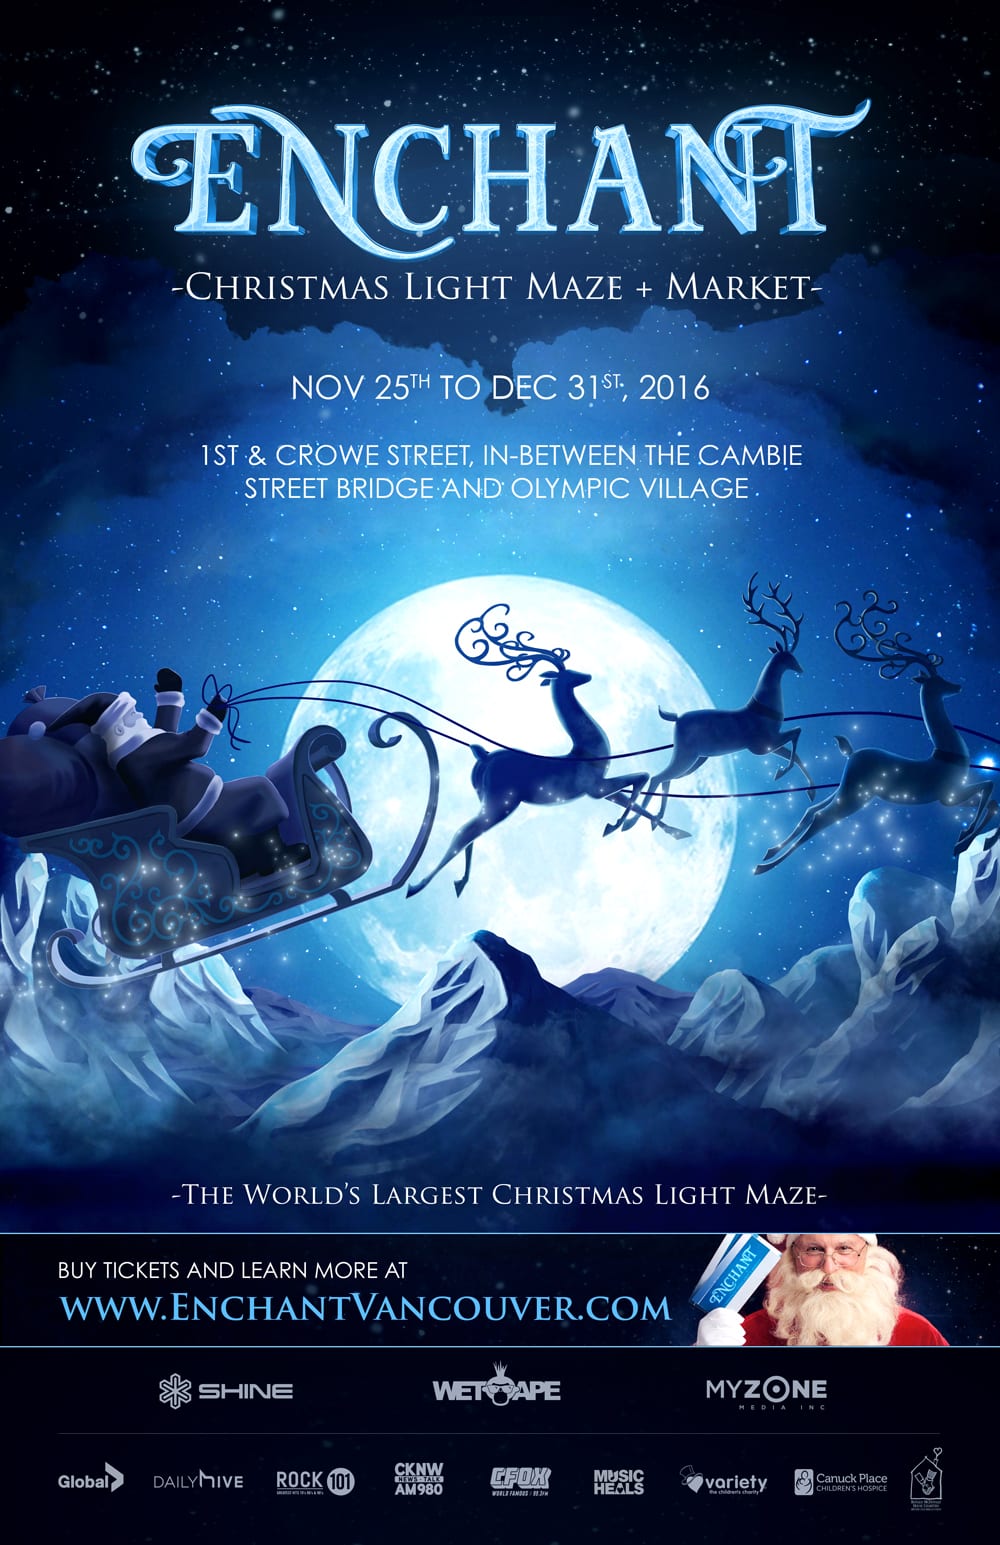 Enchant Christmas Light Maze and Market Vancouver Children and Kids